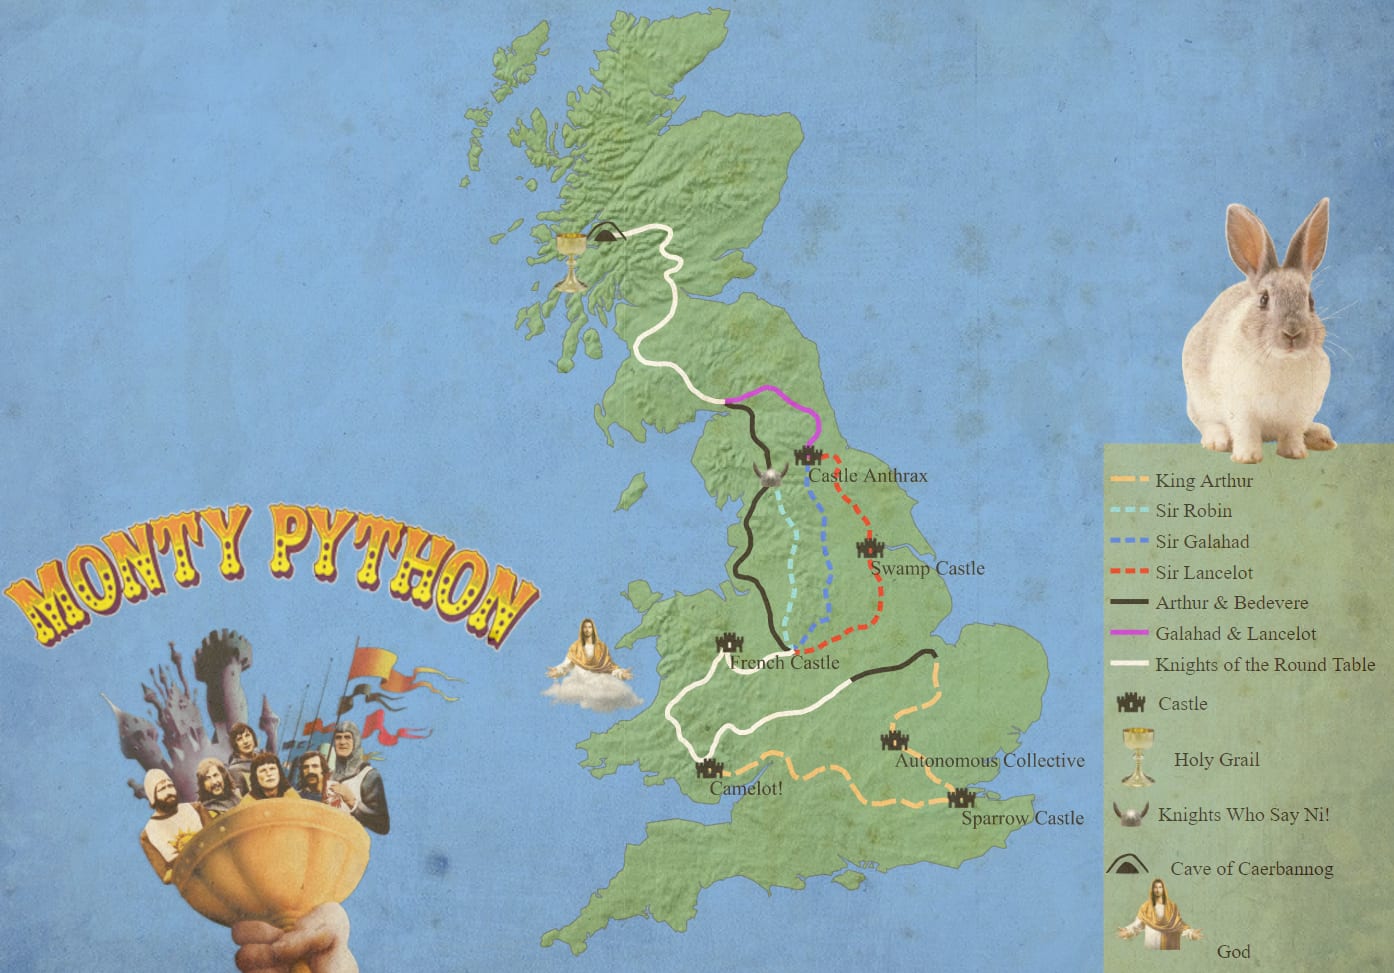 I made a Monty Python and the Holy Grail map to practice with QGIS